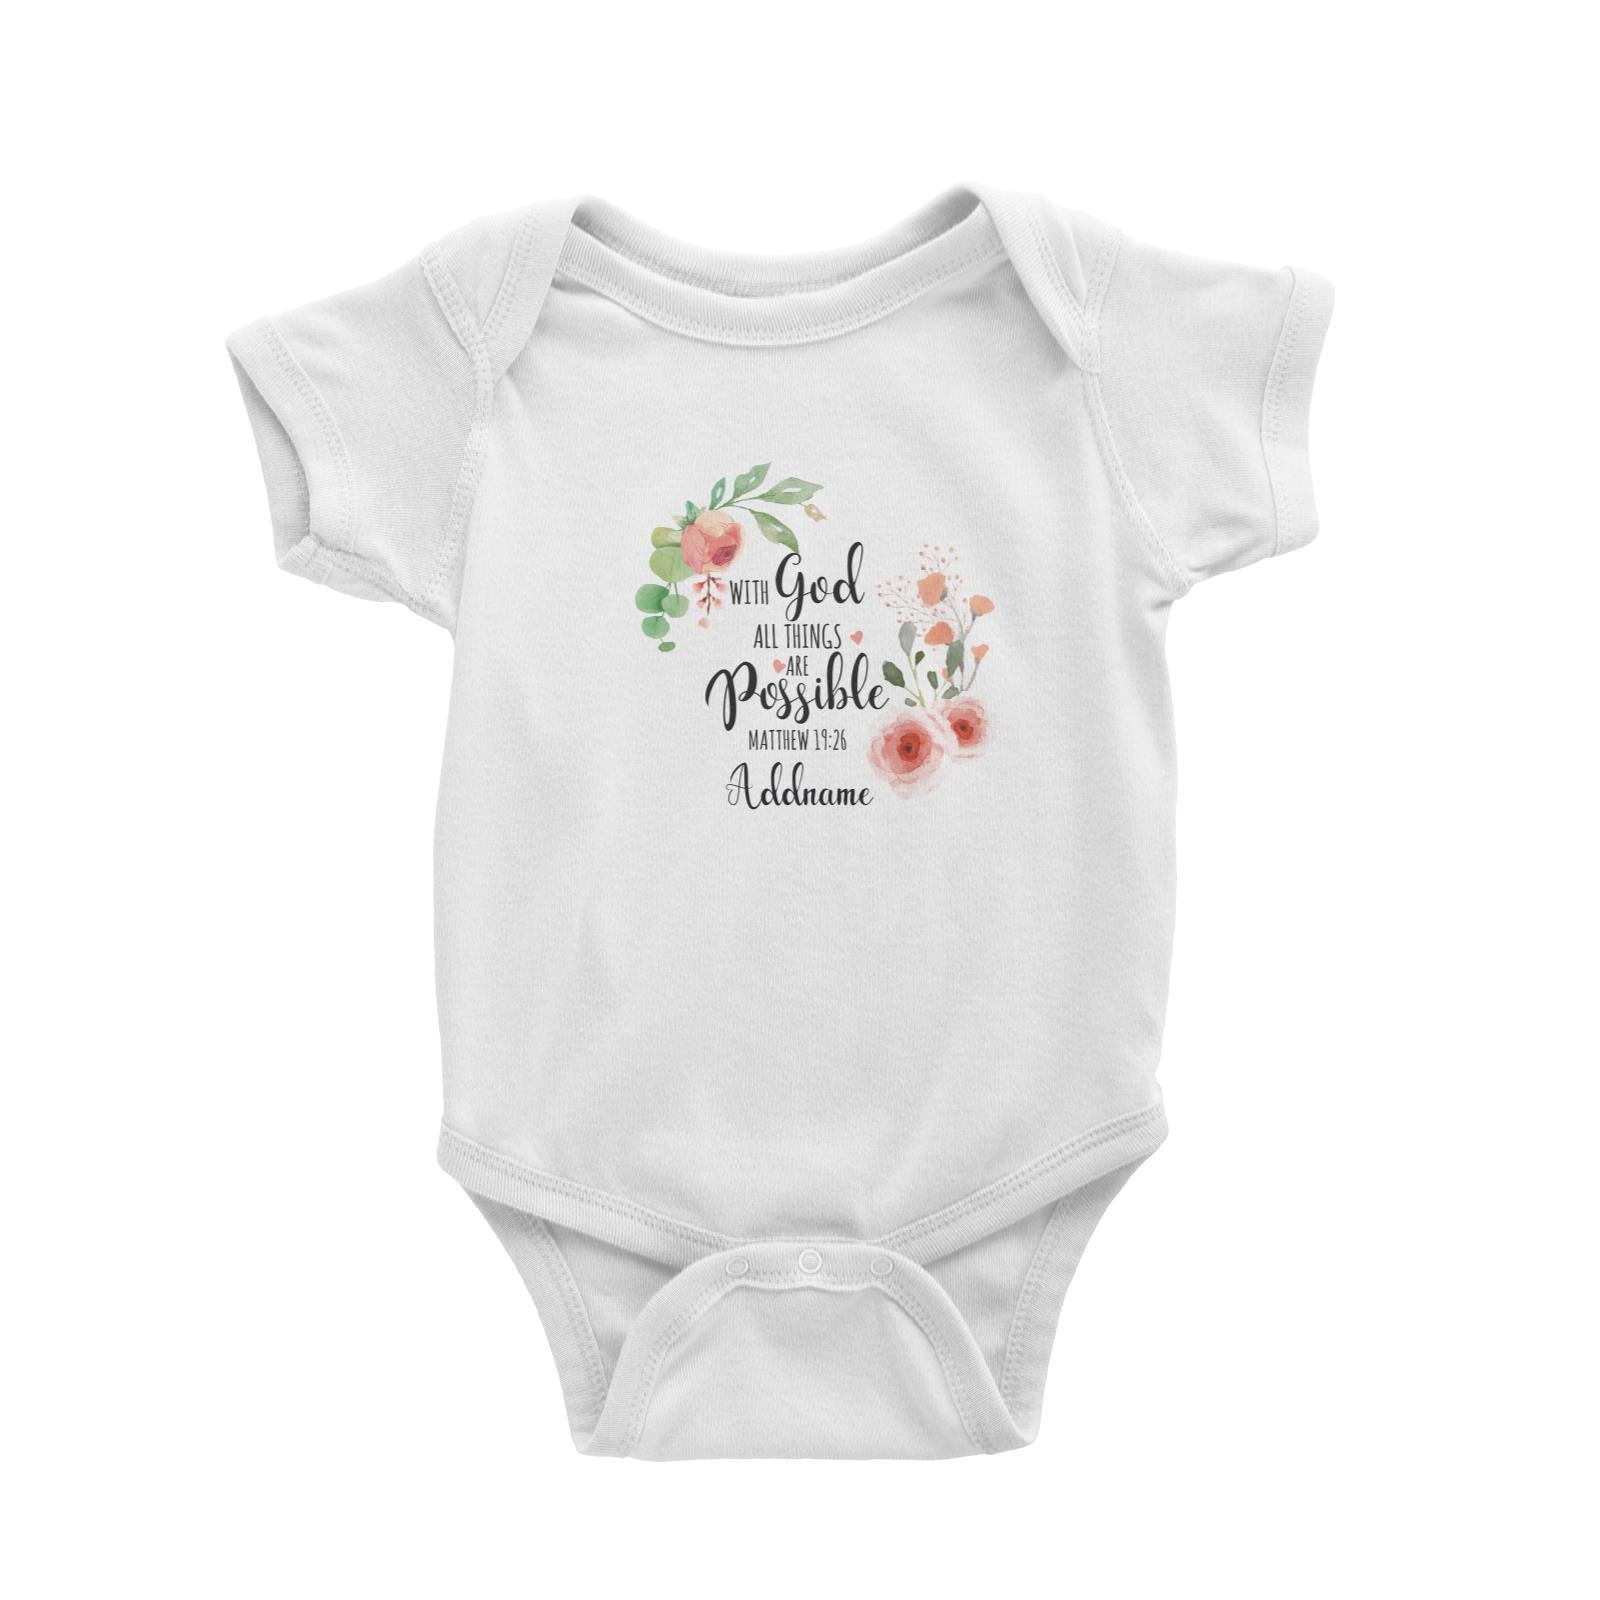 Gods Gift With God All Things Are Possible Matthew 19.26 Addname Baby Romper